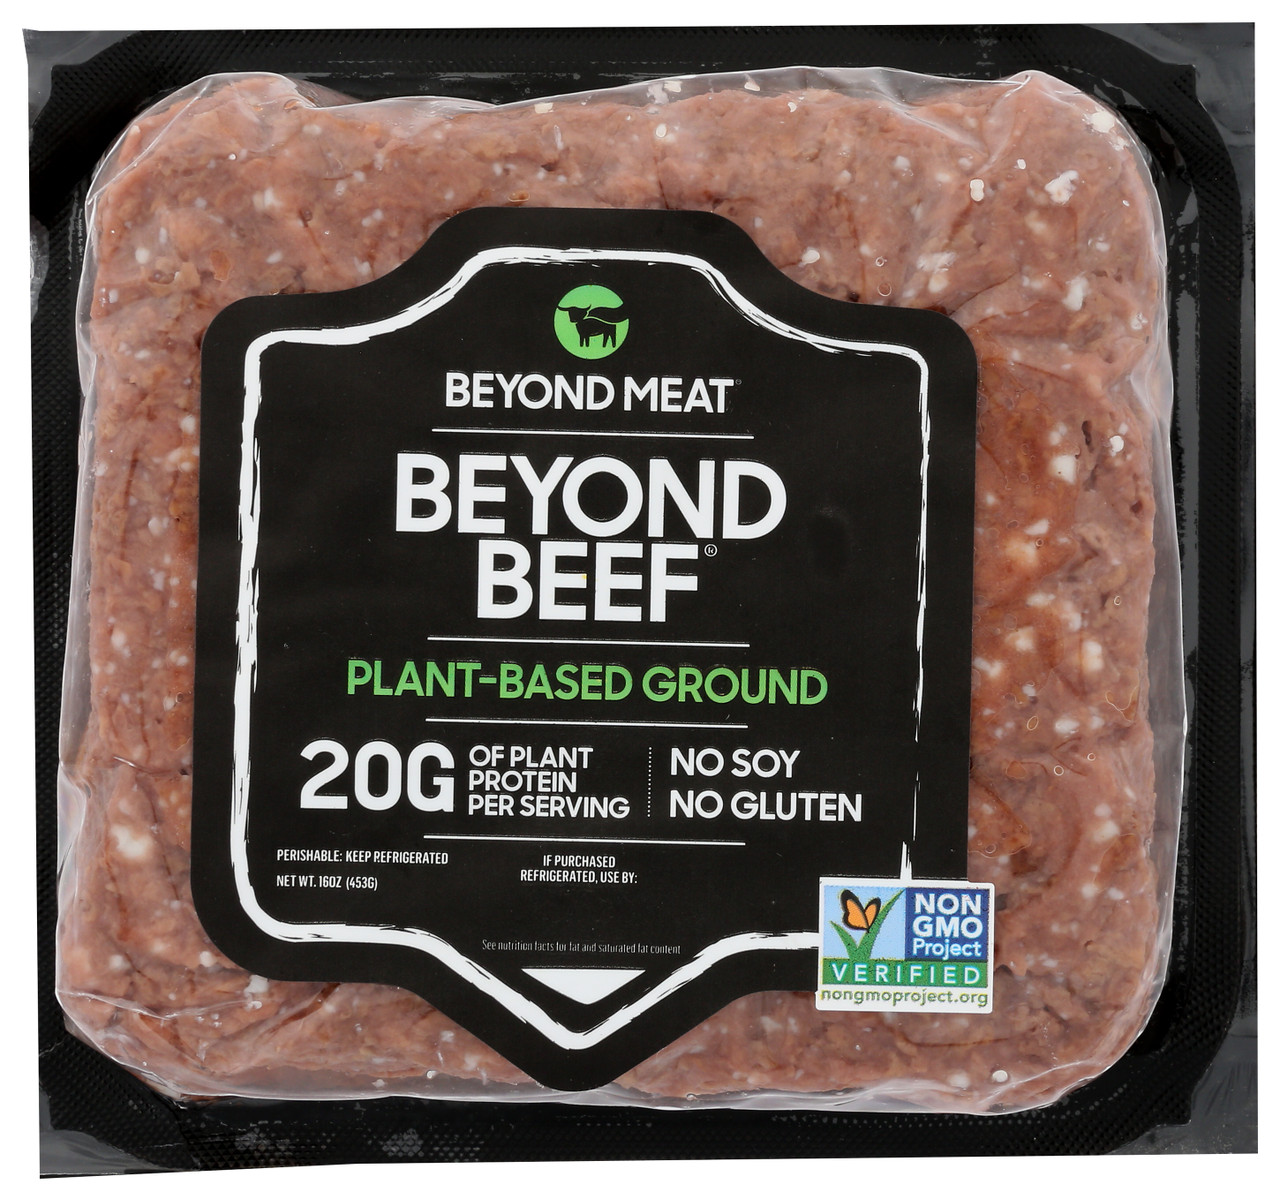 Beyond Beef Meaty/Beefy Beyond Beef Is Designed To Offer The Meaty Taste, Texture And Versatility Of Ground Beef With The Added Health And Sustainability Benefits Of Plant-Based Meat. 16oz